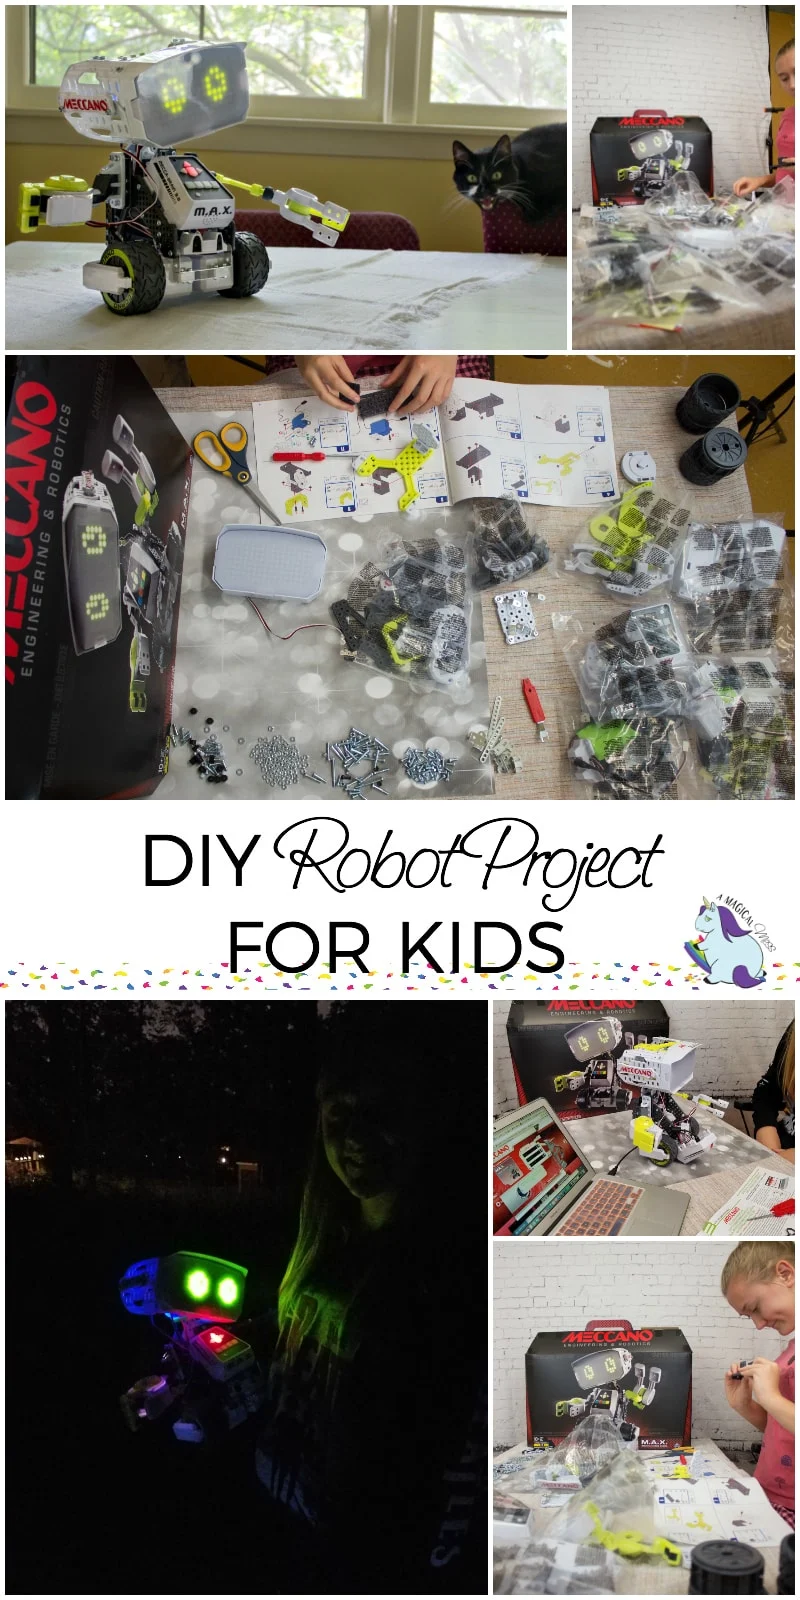 DIY Projects for Kids - The Coolest Robot in Town Meccano M.A.X. #Meccano #MAXRobot AD